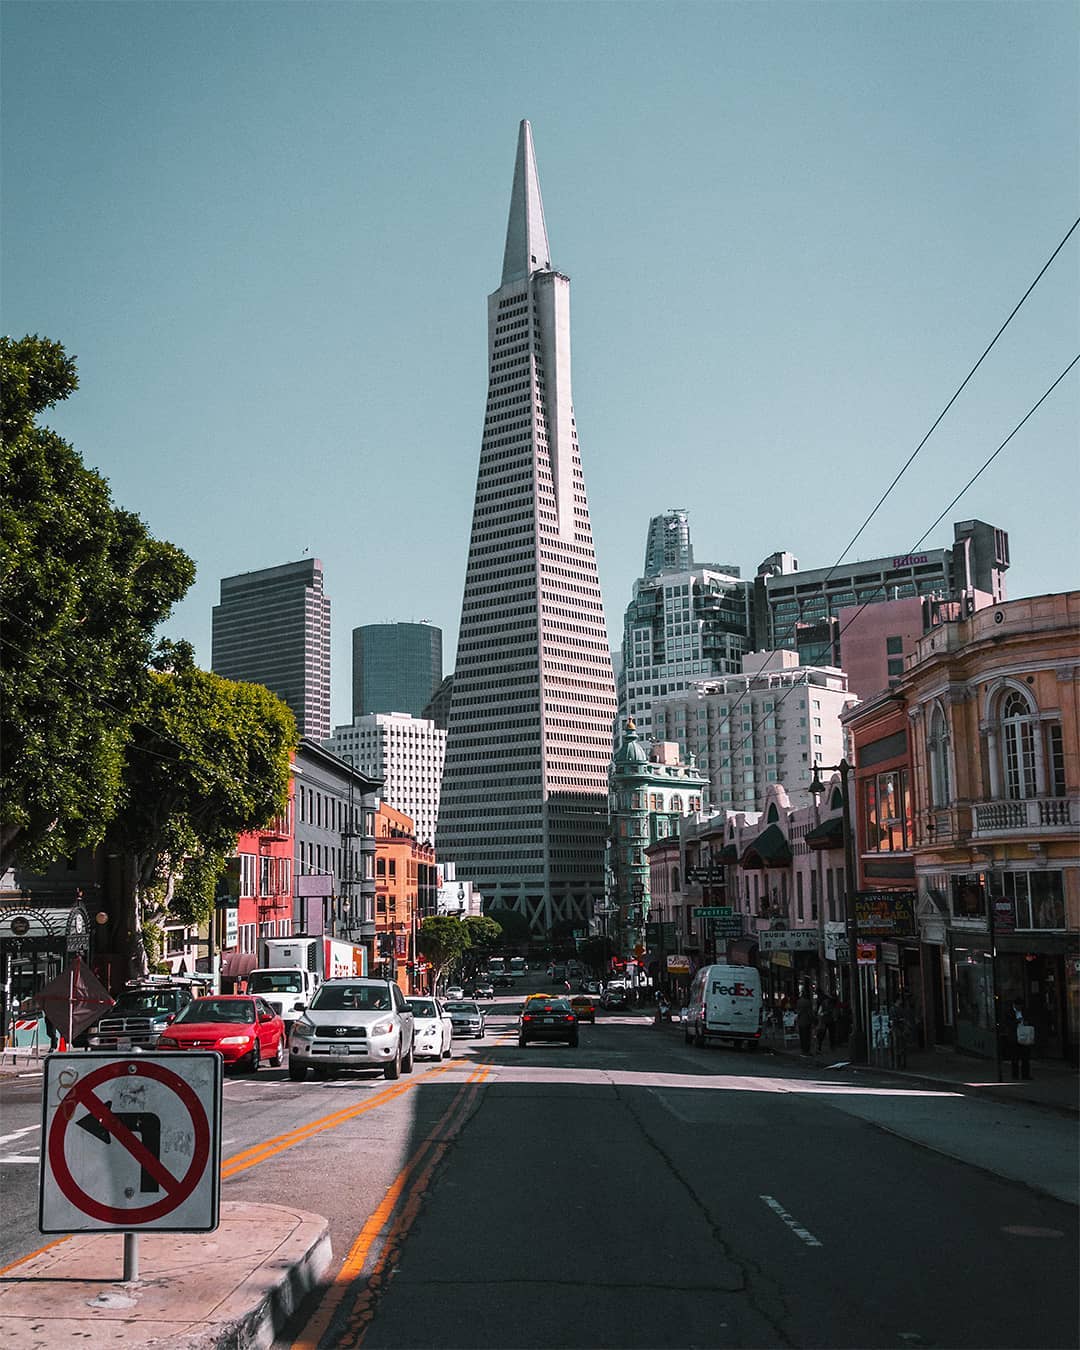 The Transamerica Pyramid in San Francisco Financial District. Photo by Instagram user @nothingsunknown